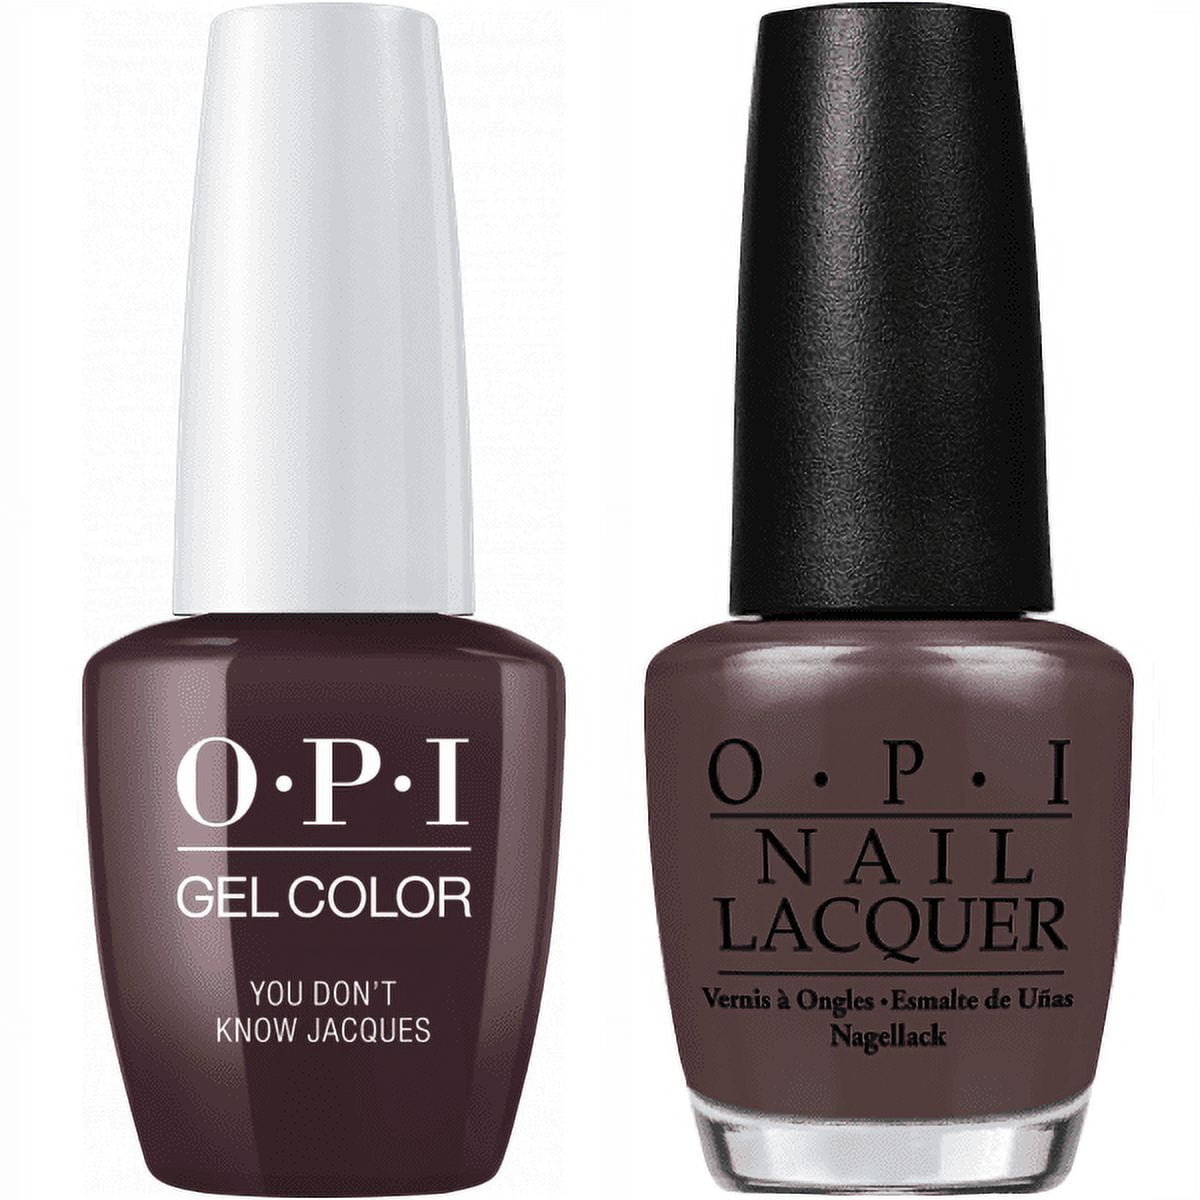 OPI Over the Taupe / OPI You don't know Jacques / CHANEL 5…